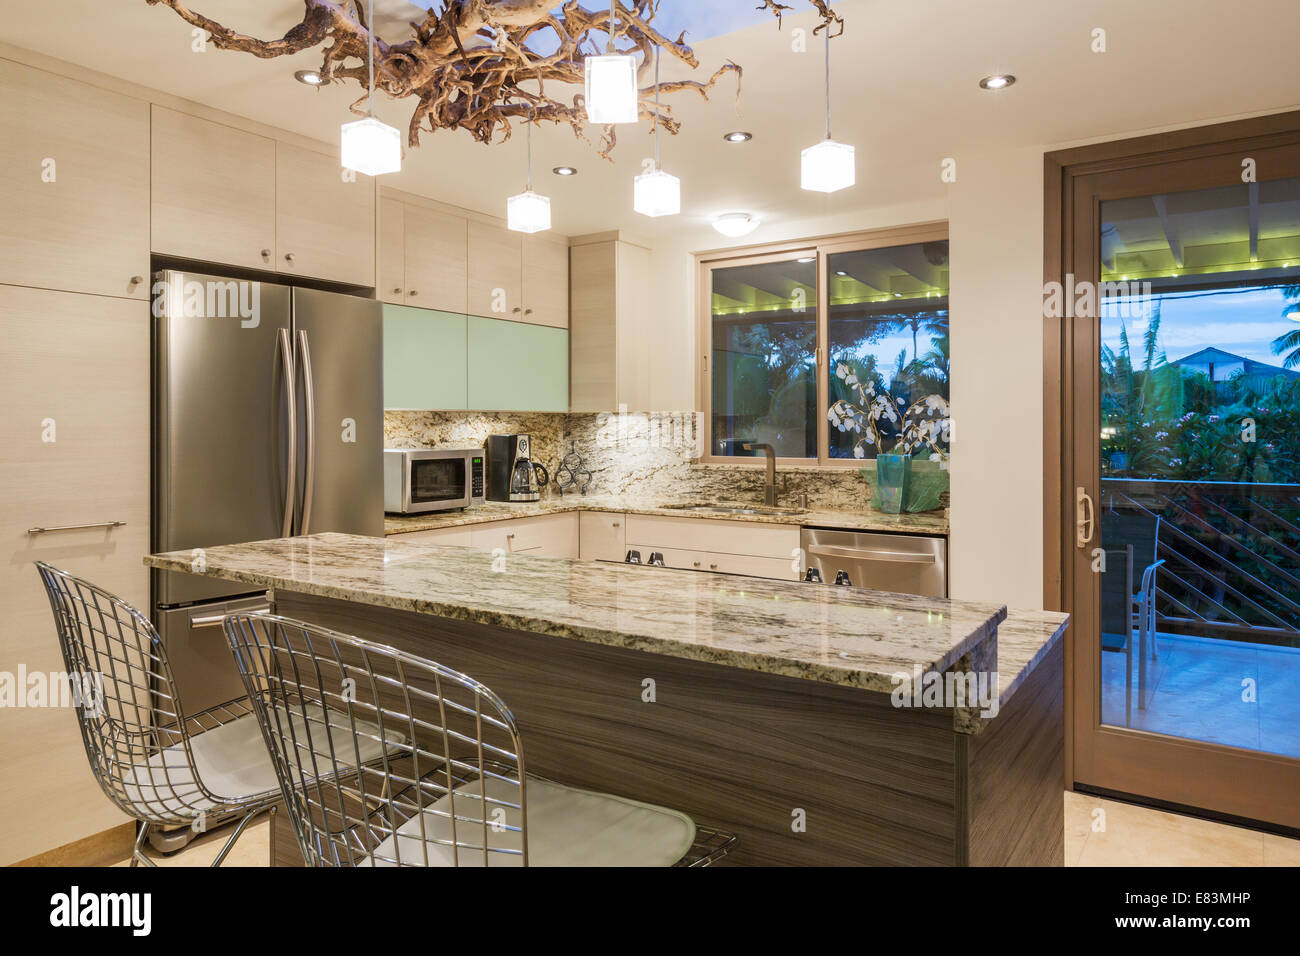 Kitchen in Contemporary Modern Home Stock Photo